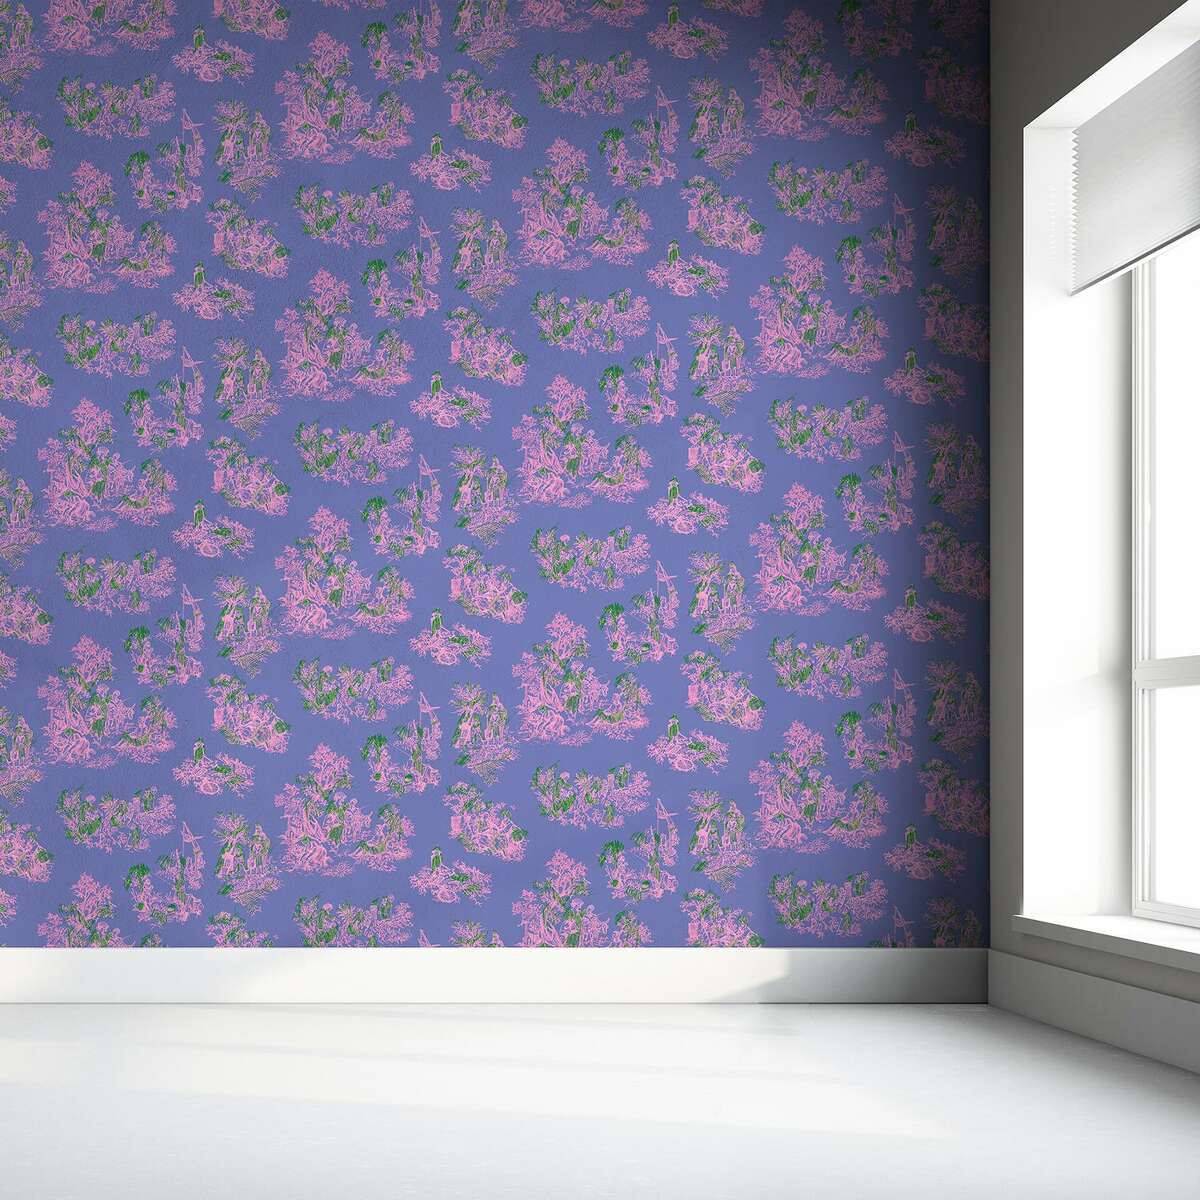 Perwinkle is a background color in this wallpaper pattern by Once Upon Our Time. On Dec. 12, 2021, Pantone announced that "Very Peri" -- a periwinkle with deep red-violet undertones -- would be its 2022 Color of the Year.